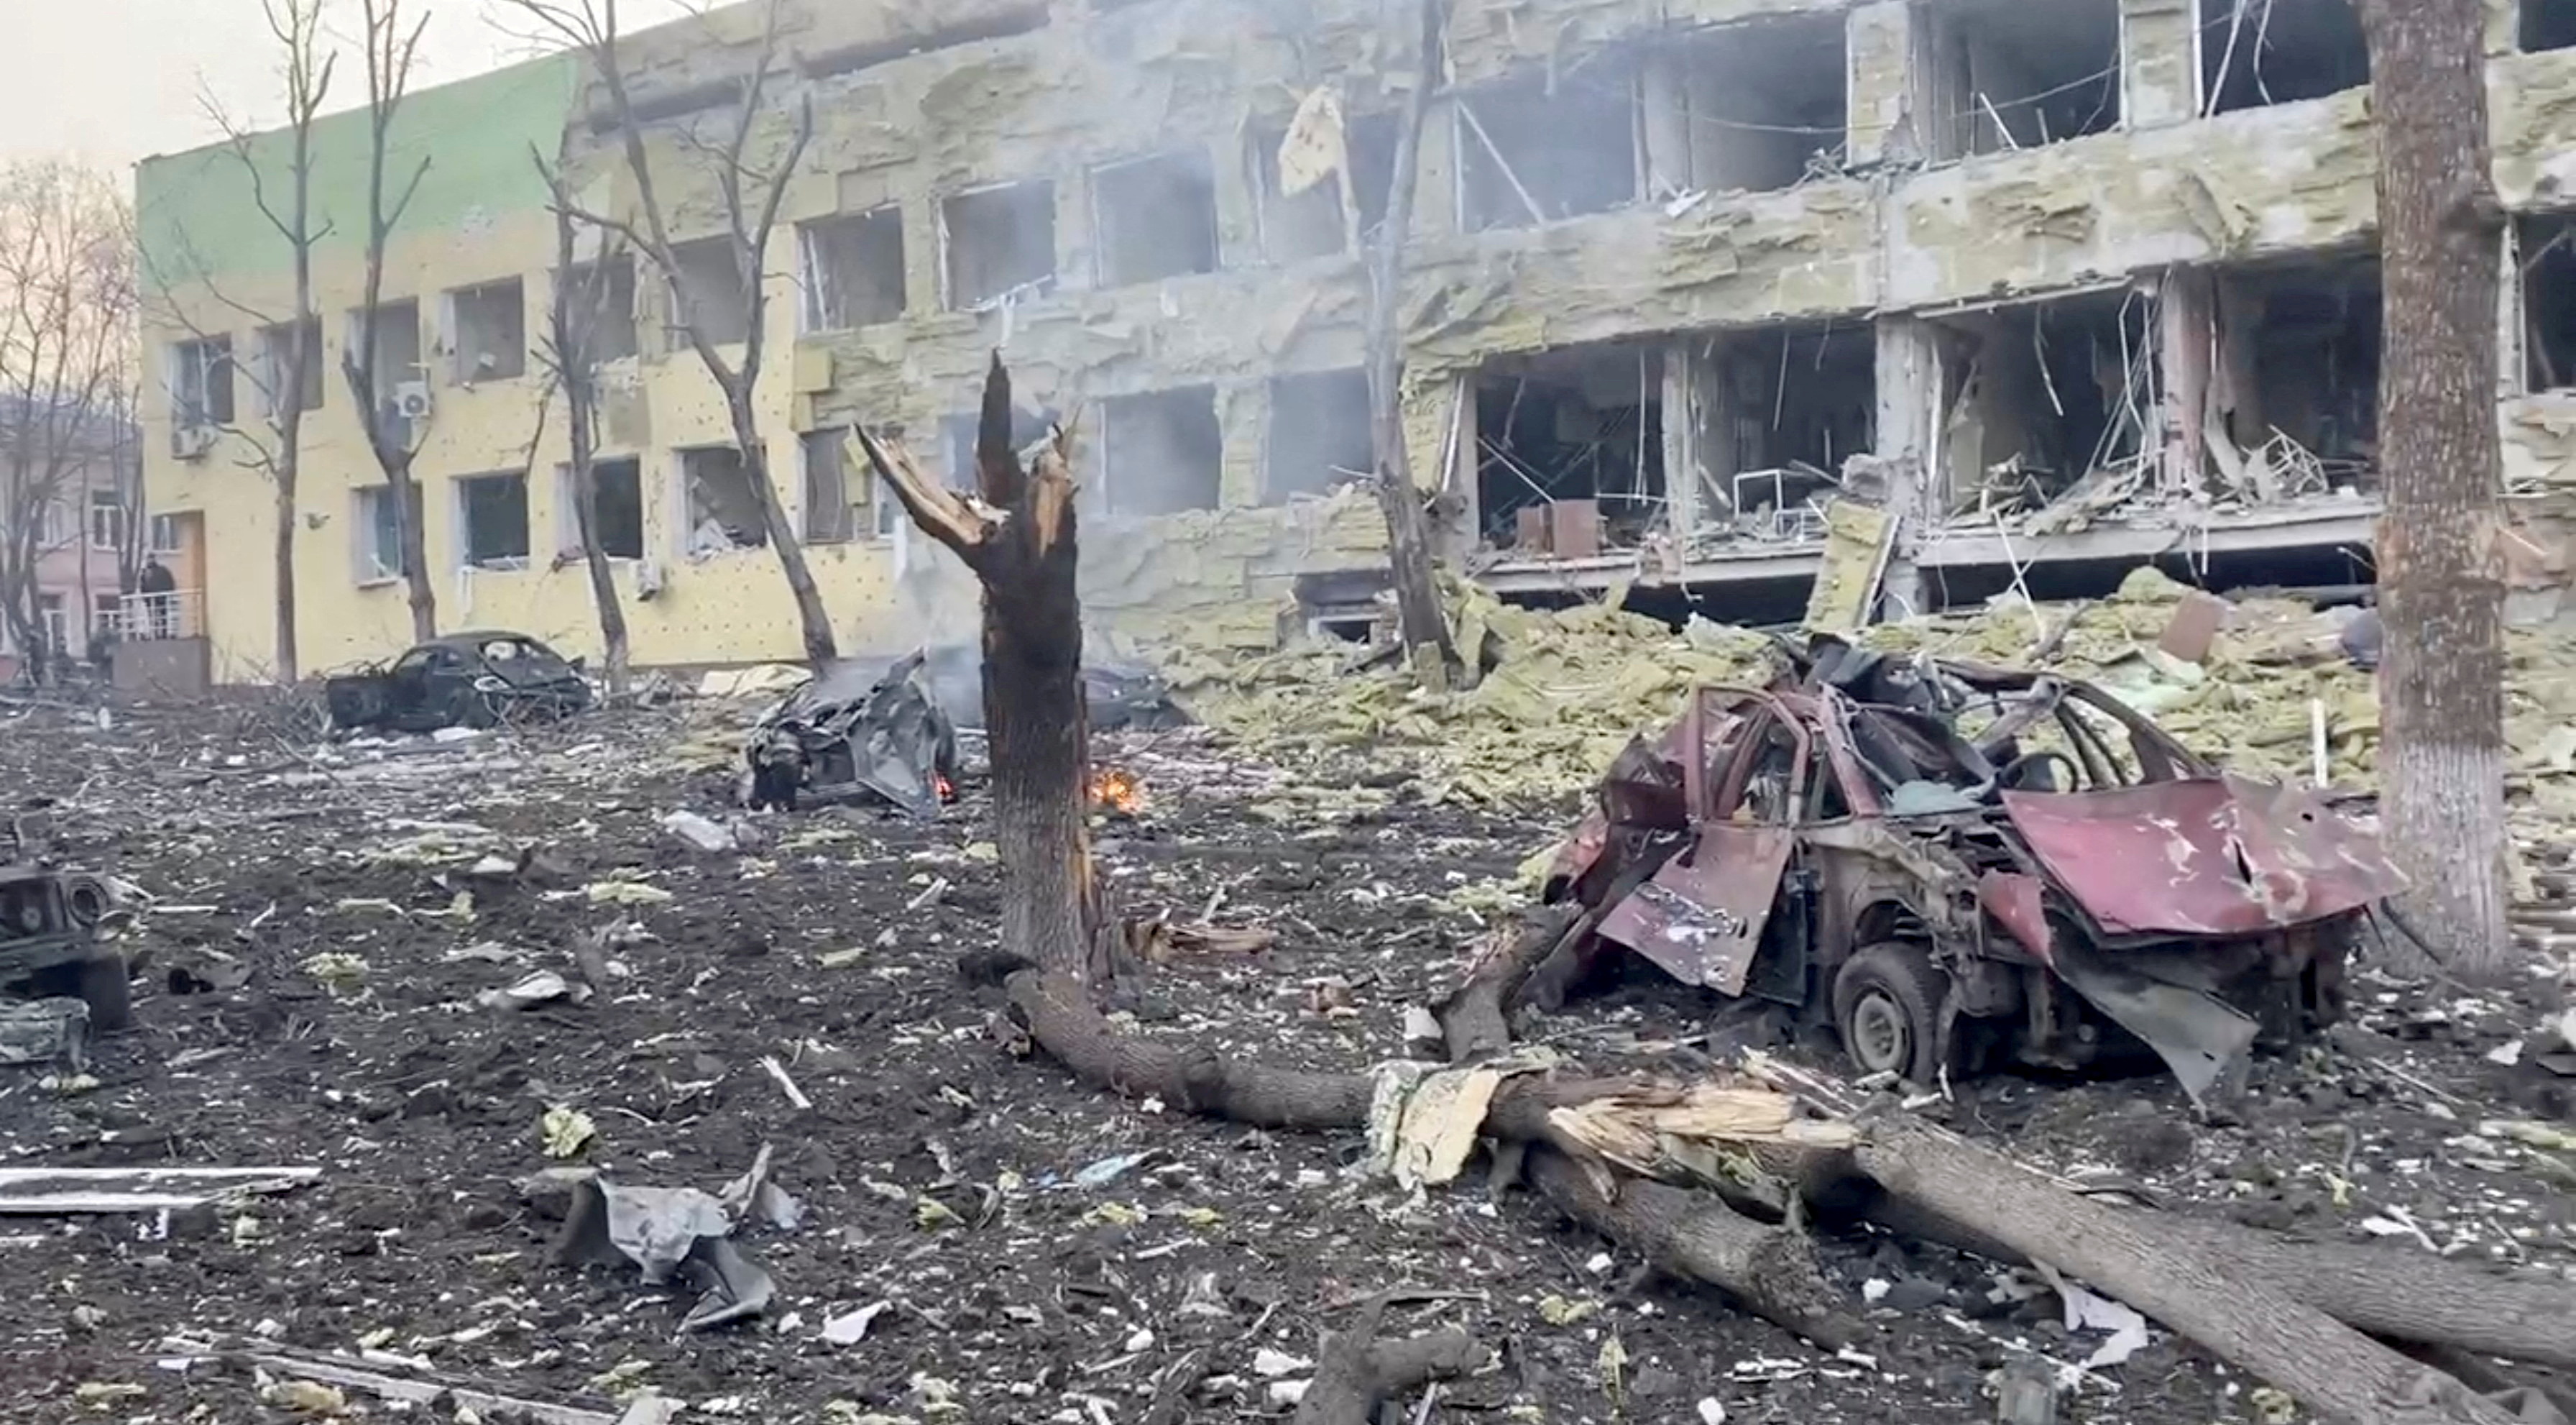 Destruction of children's hospital as Russia's invasion of Ukraine continues, in Mariupol